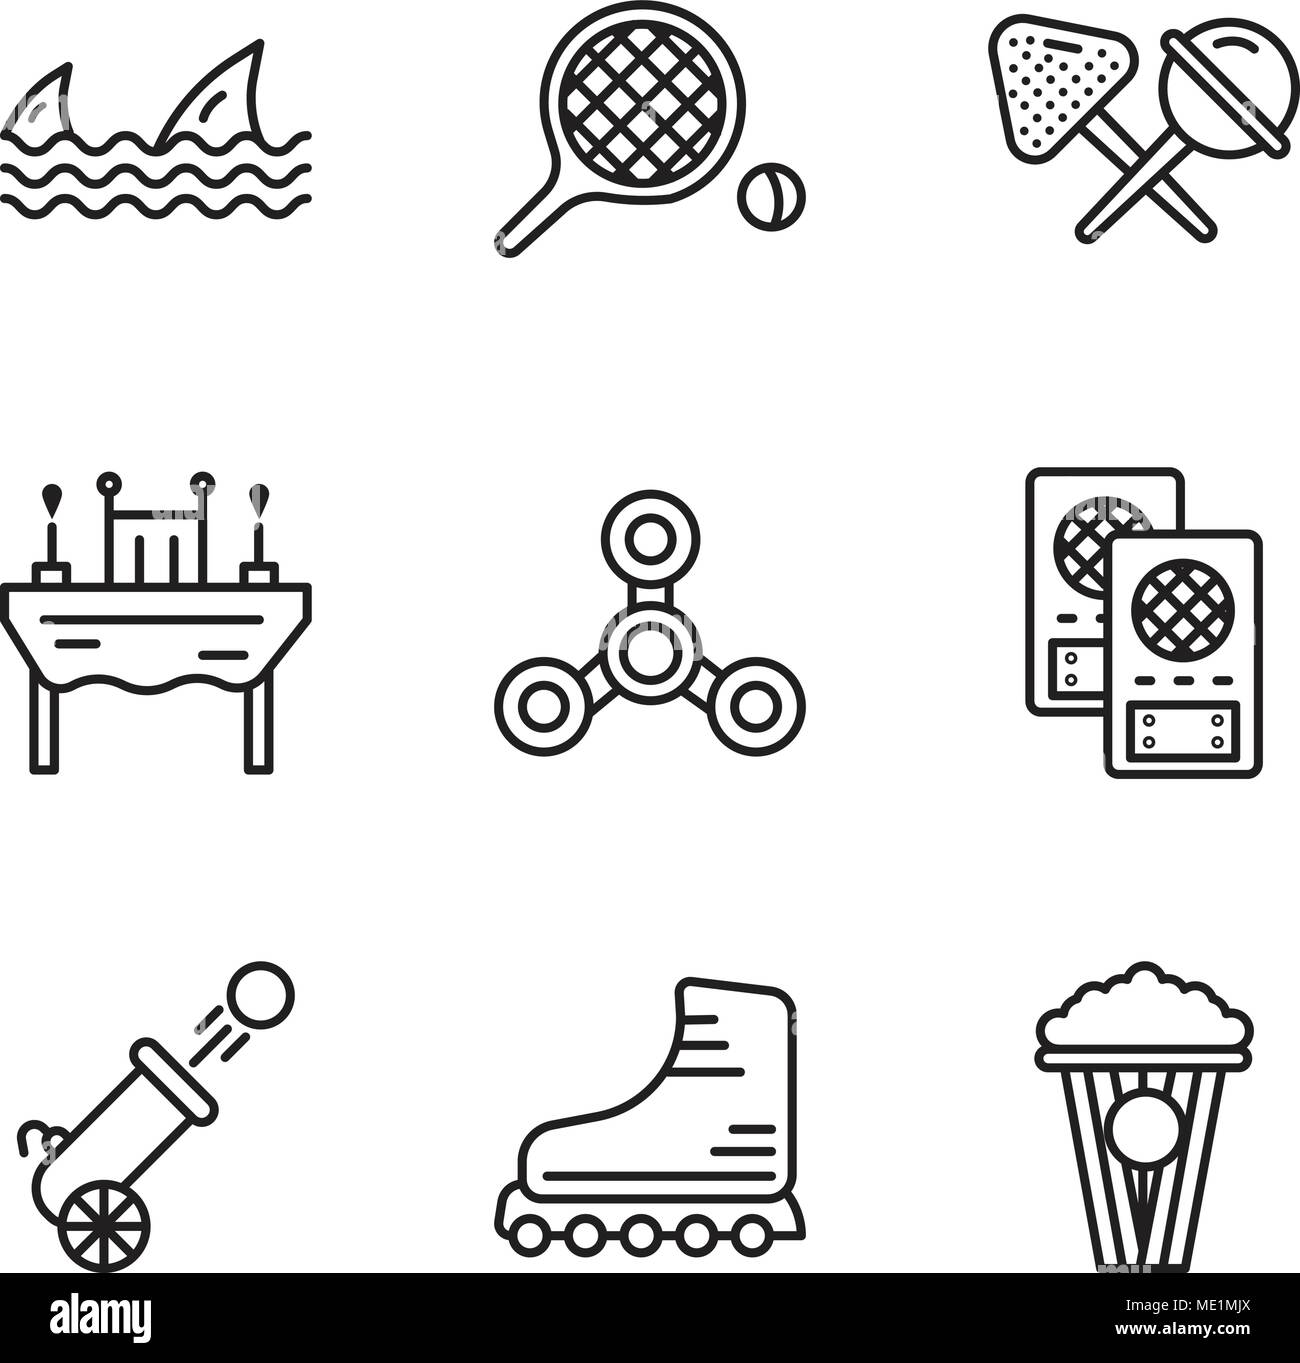 Set Of 9 simple editable icons such as Popcorn, Rollers, Cannon, Loudspeaker, Drone, Dinner, Candy, Table tennis, Sharks, can be used for mobile, web  Stock Vector